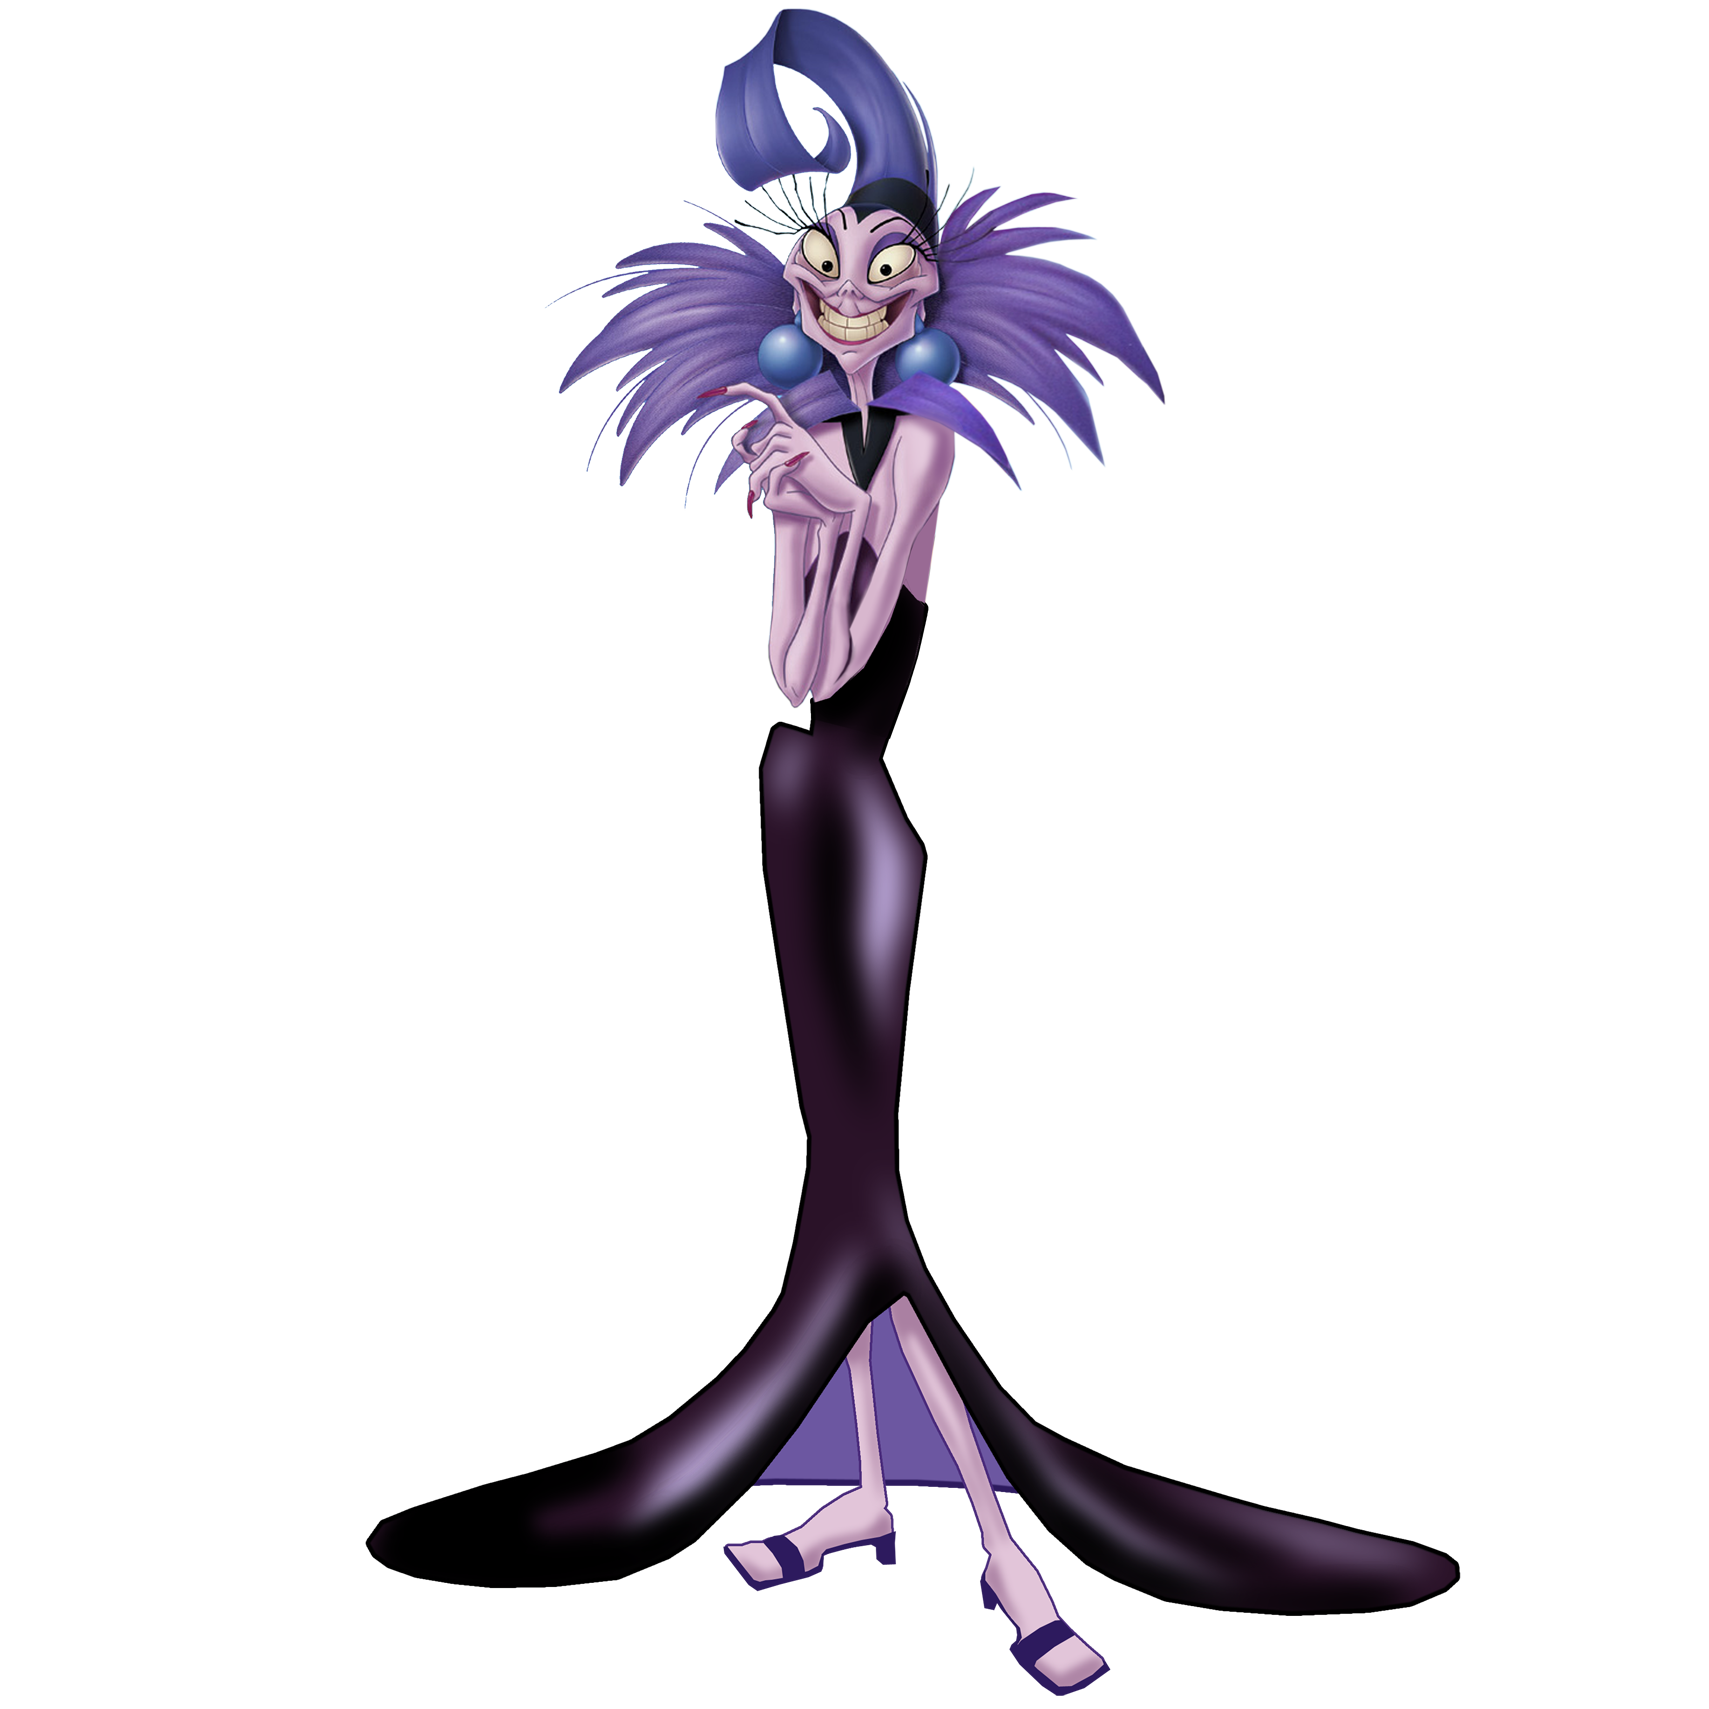 http://images3.wikia.nocookie.net/__cb20120725063725/disney/images/7/71/Yzma.png